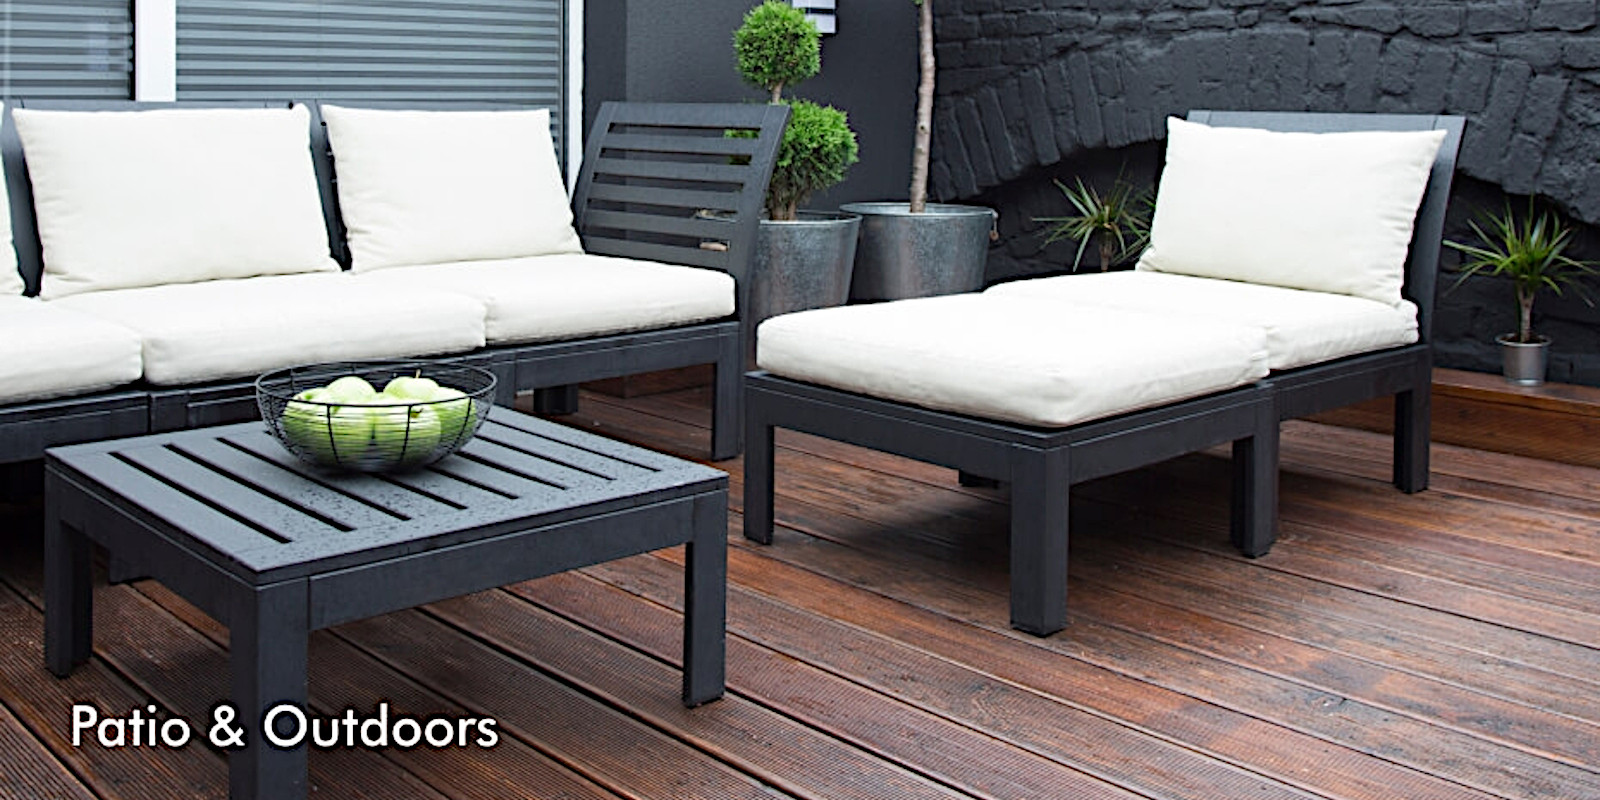 Patio furniture cost-effective